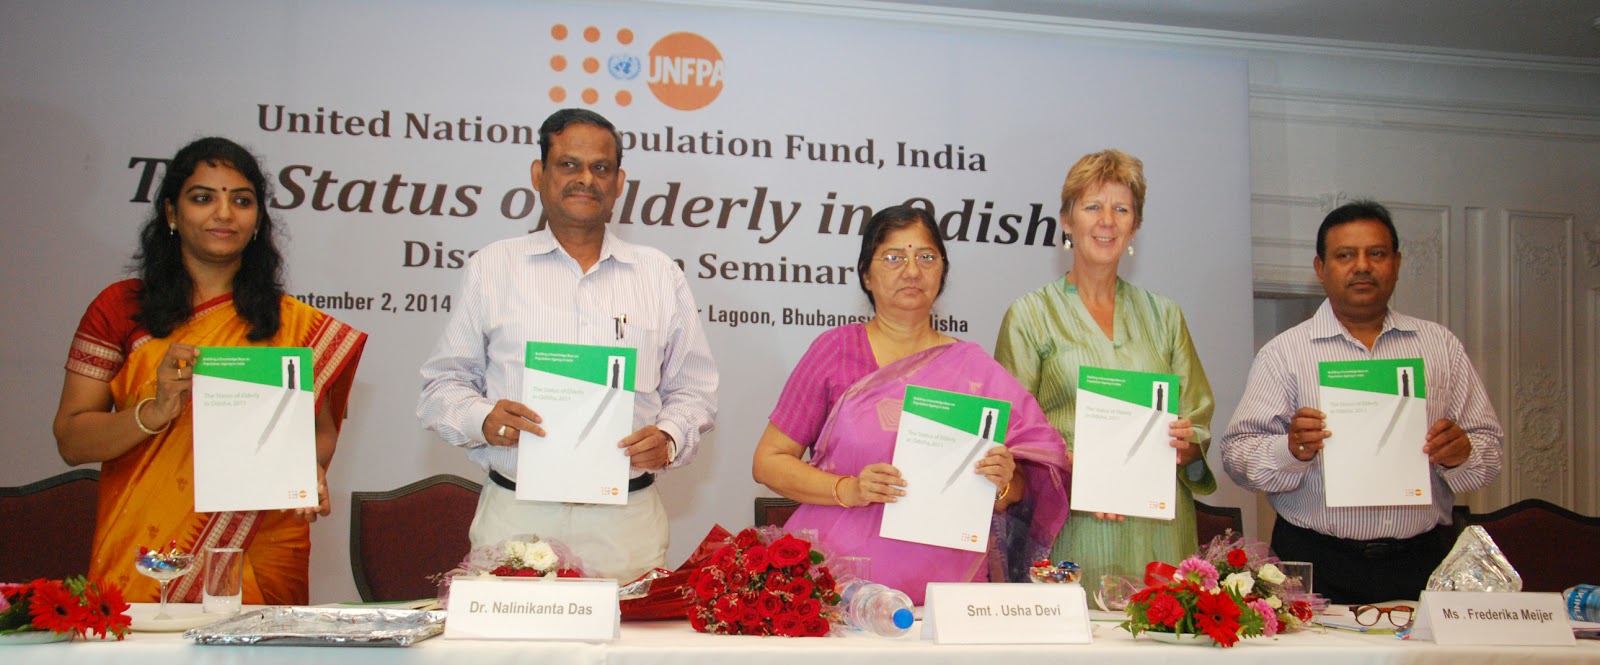 Utilization Of Social Security Schemes For Elderly very Low In Odisha 